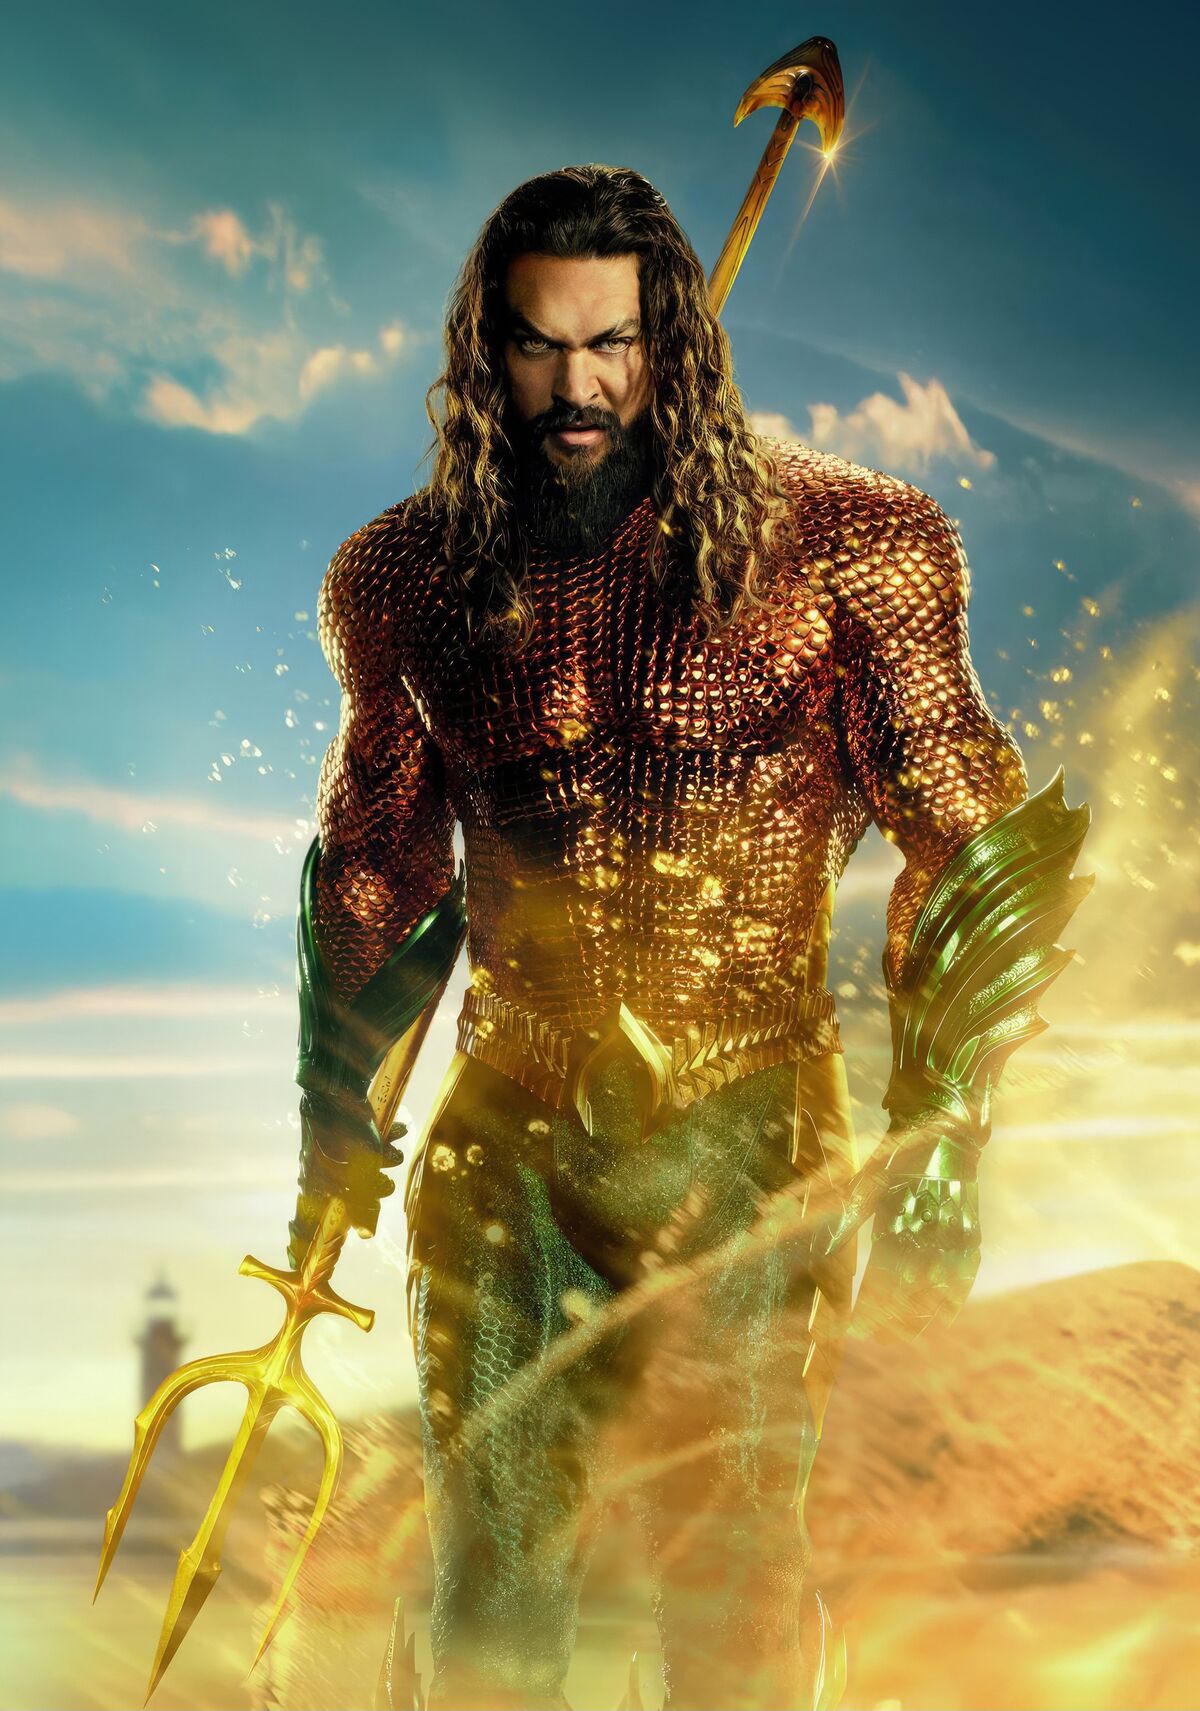 https://static.wikia.nocookie.net/dccu/images/e/e1/Aquaman%26theLostKingdom_-_textless_German_Poster.jpg/revision/latest/scale-to-width-down/1200?cb=20231124005303